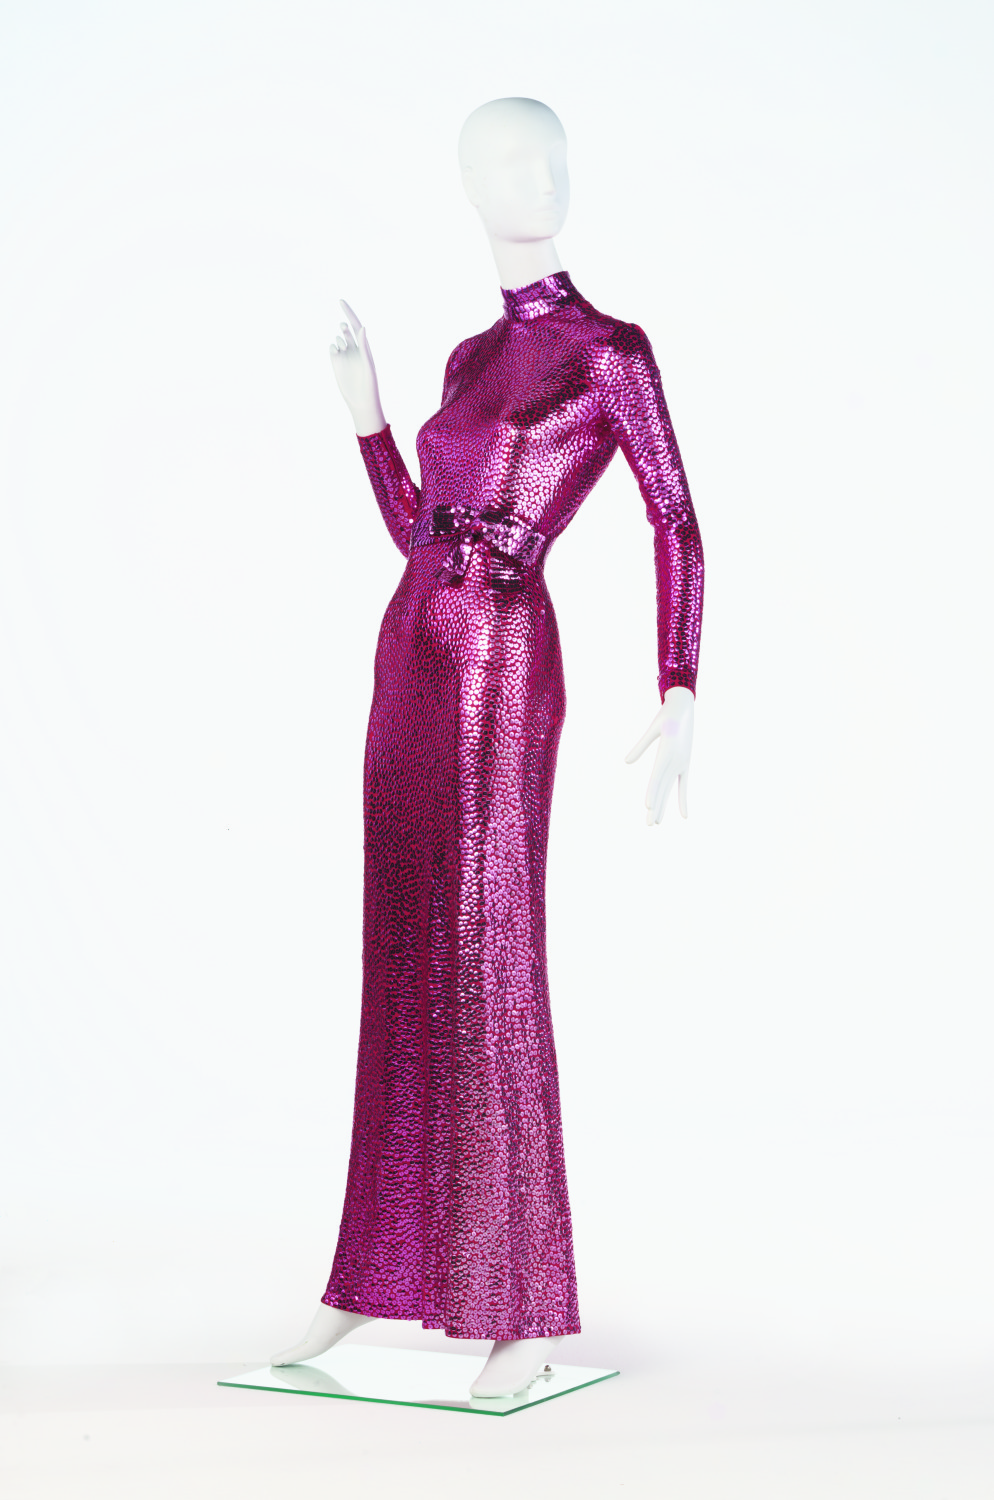 Norman Norell, Mermaid evening dress, 1960-1972. Silk jersey embroidered with sequins. Gift of Mrs. Kelly Ellman